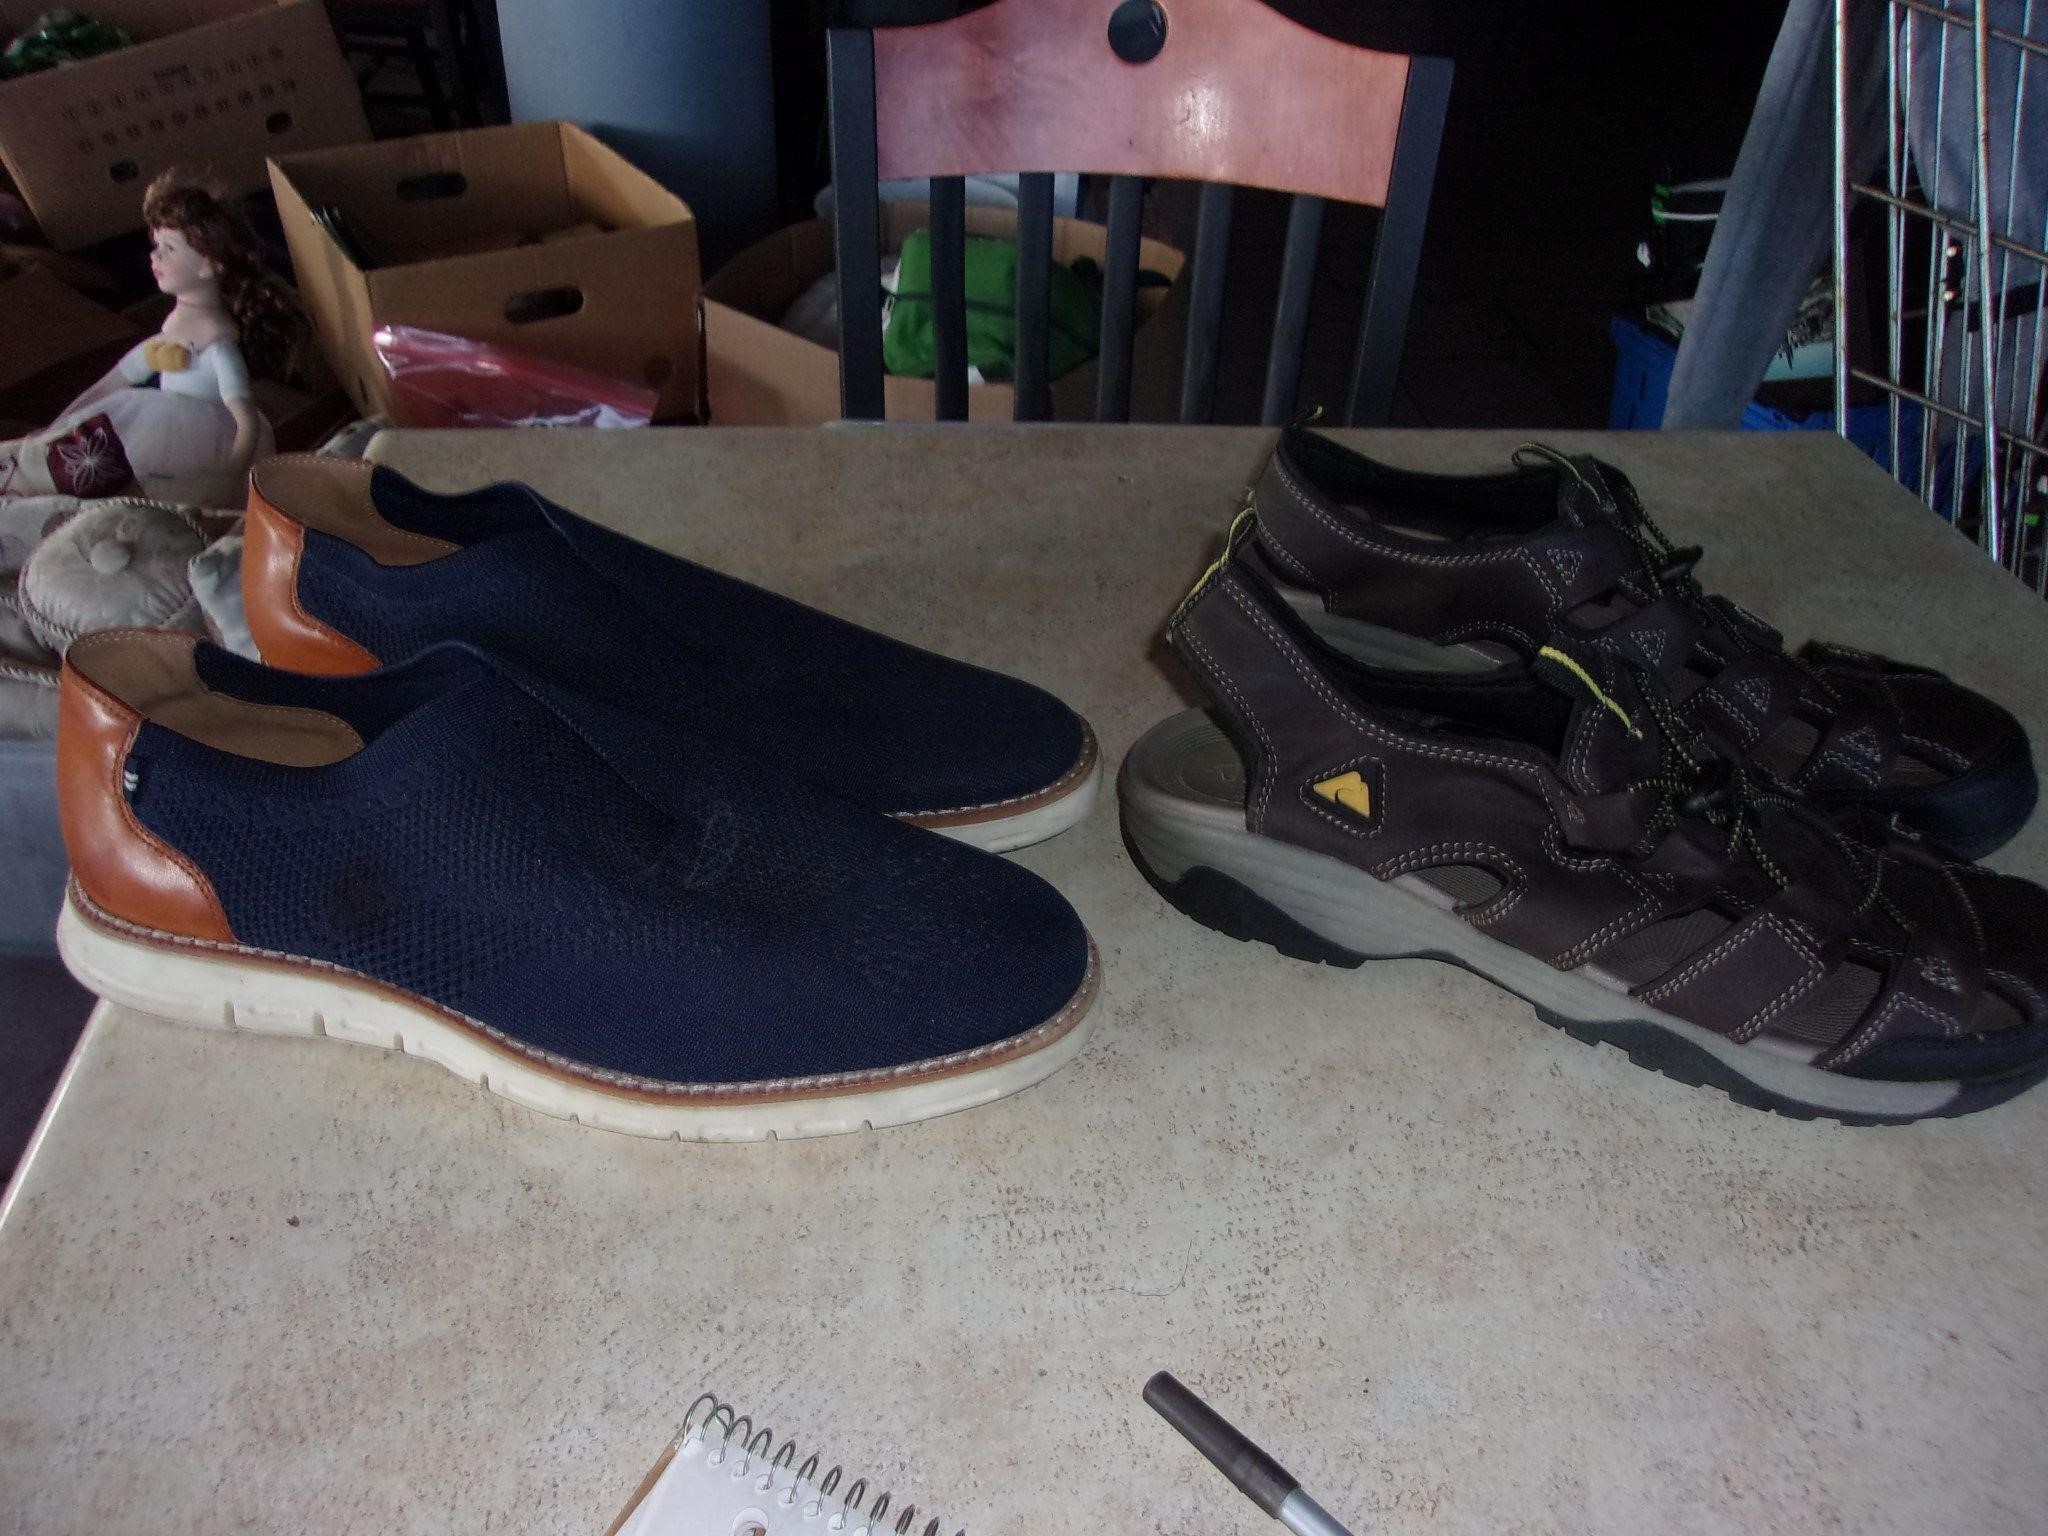 summer shoes ozark trail and nautica 10 1/2